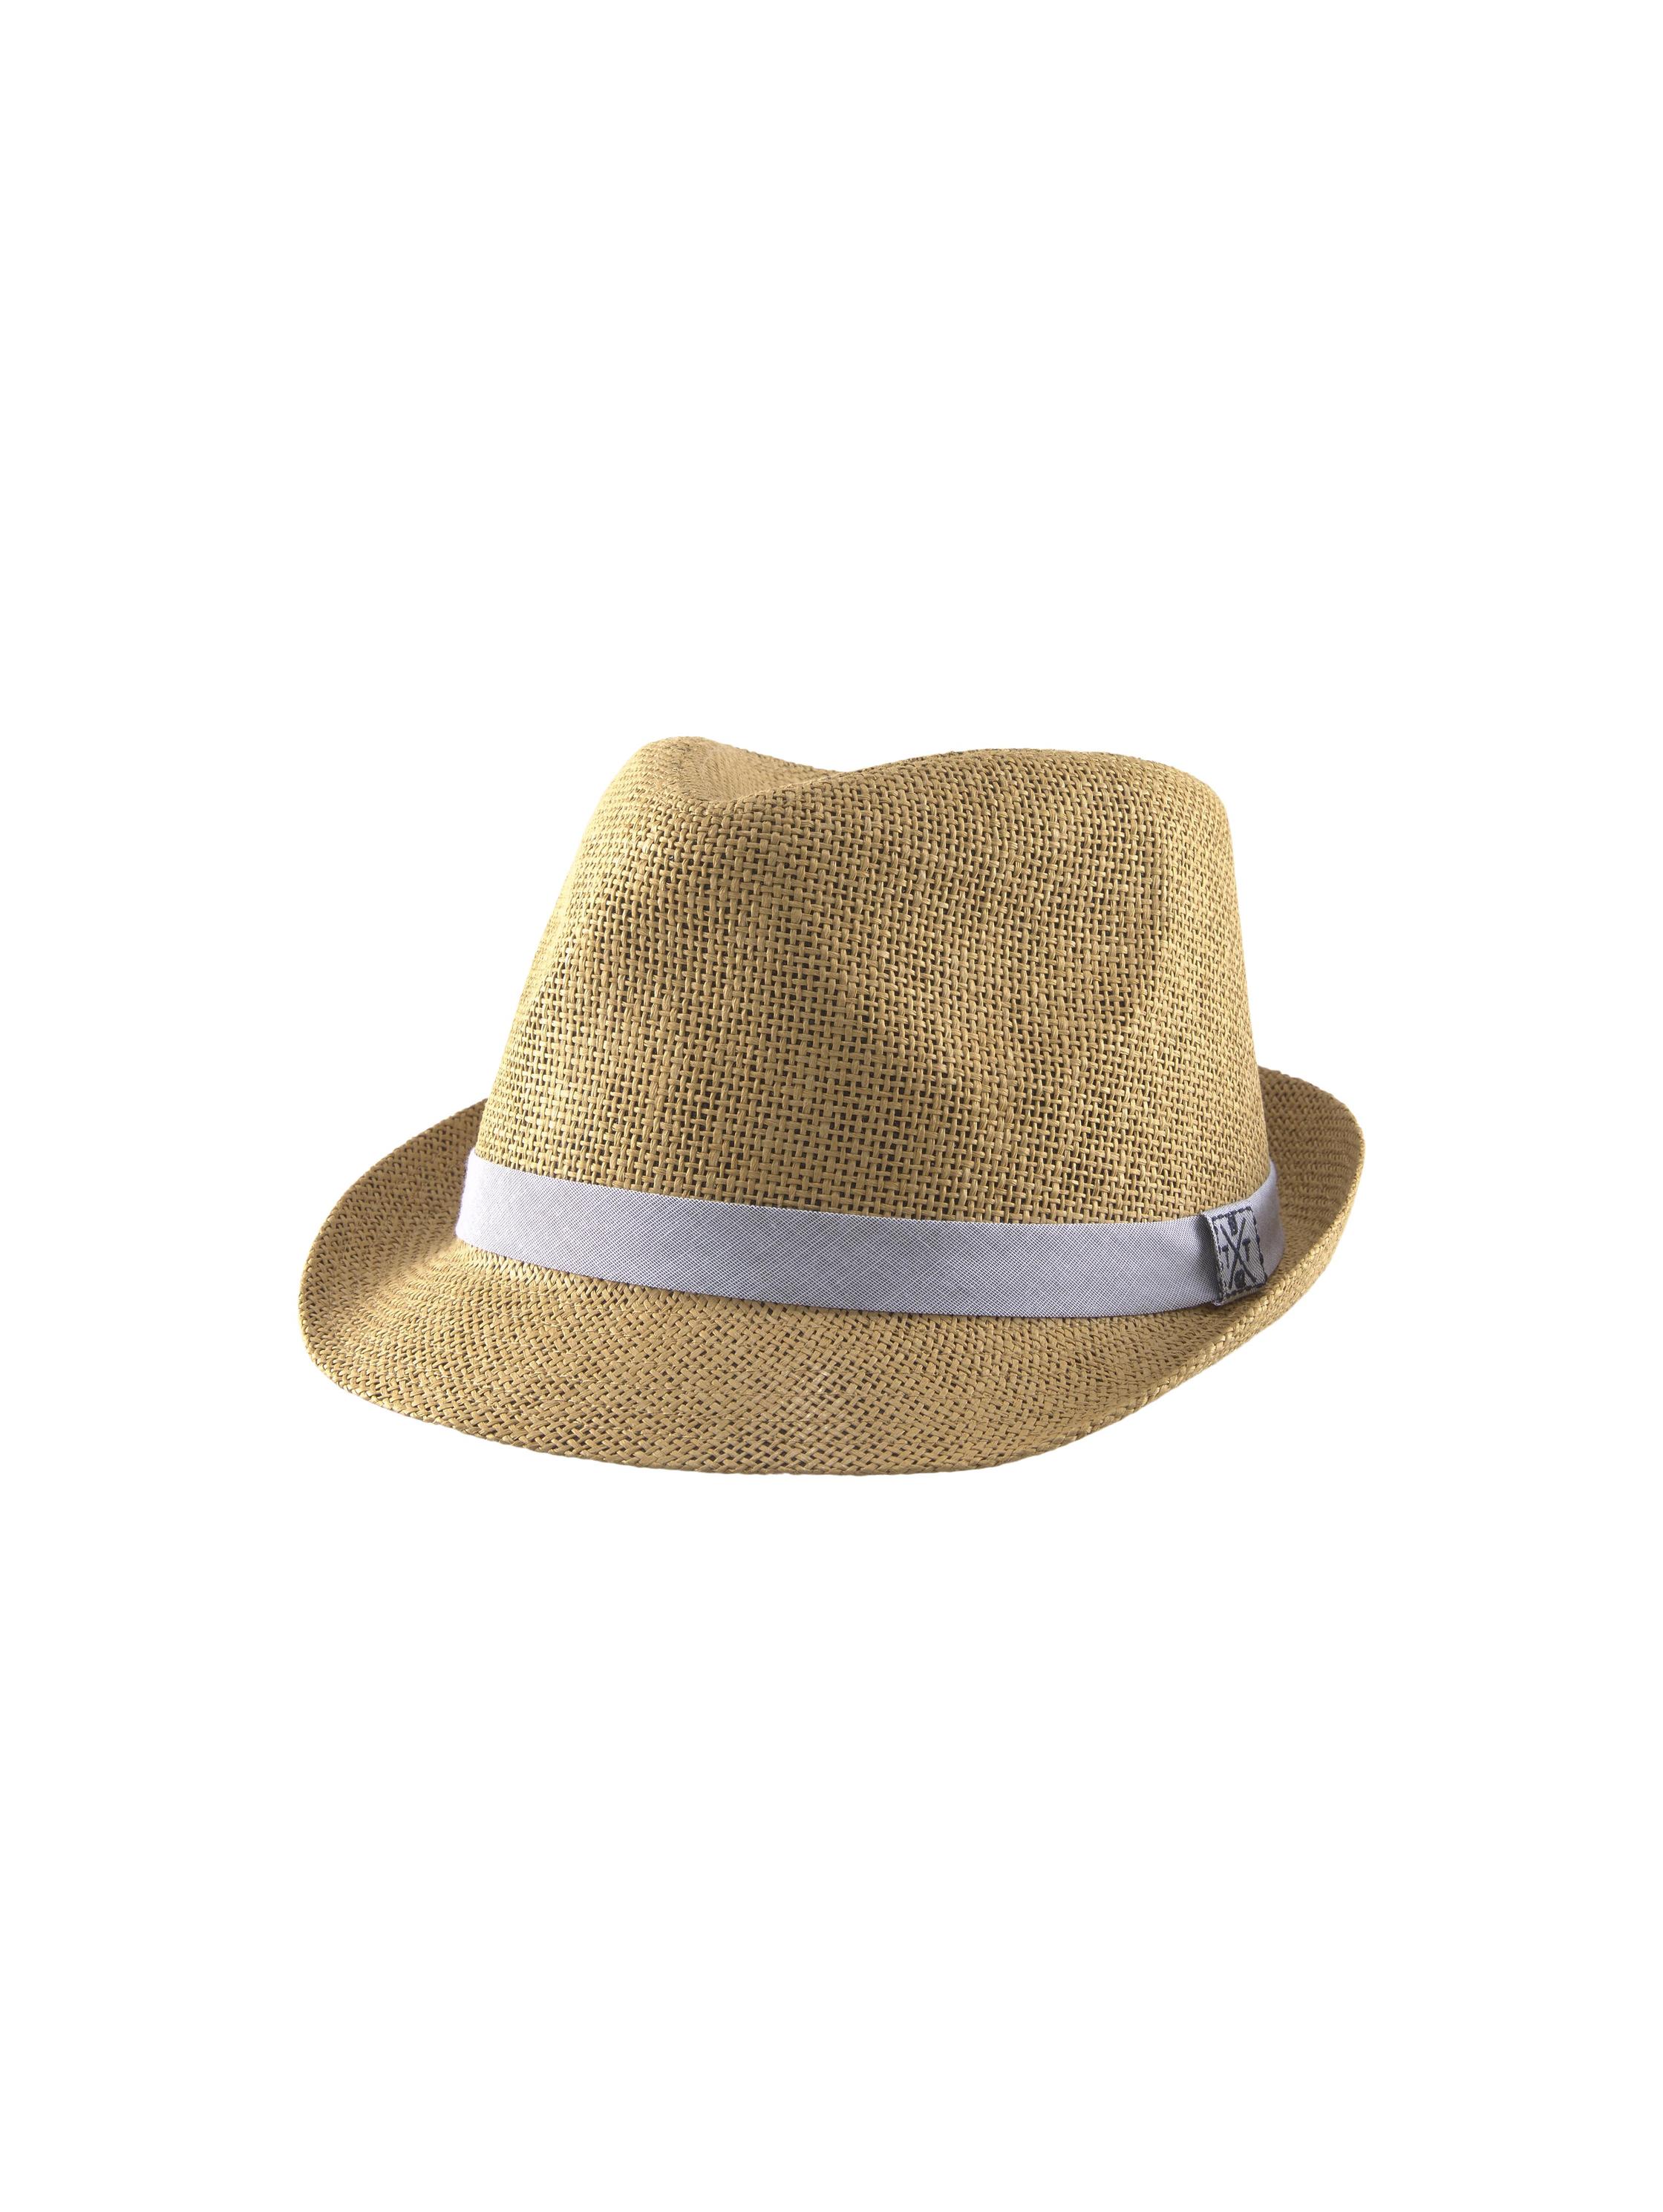 straw hat with band, Smoked Beige